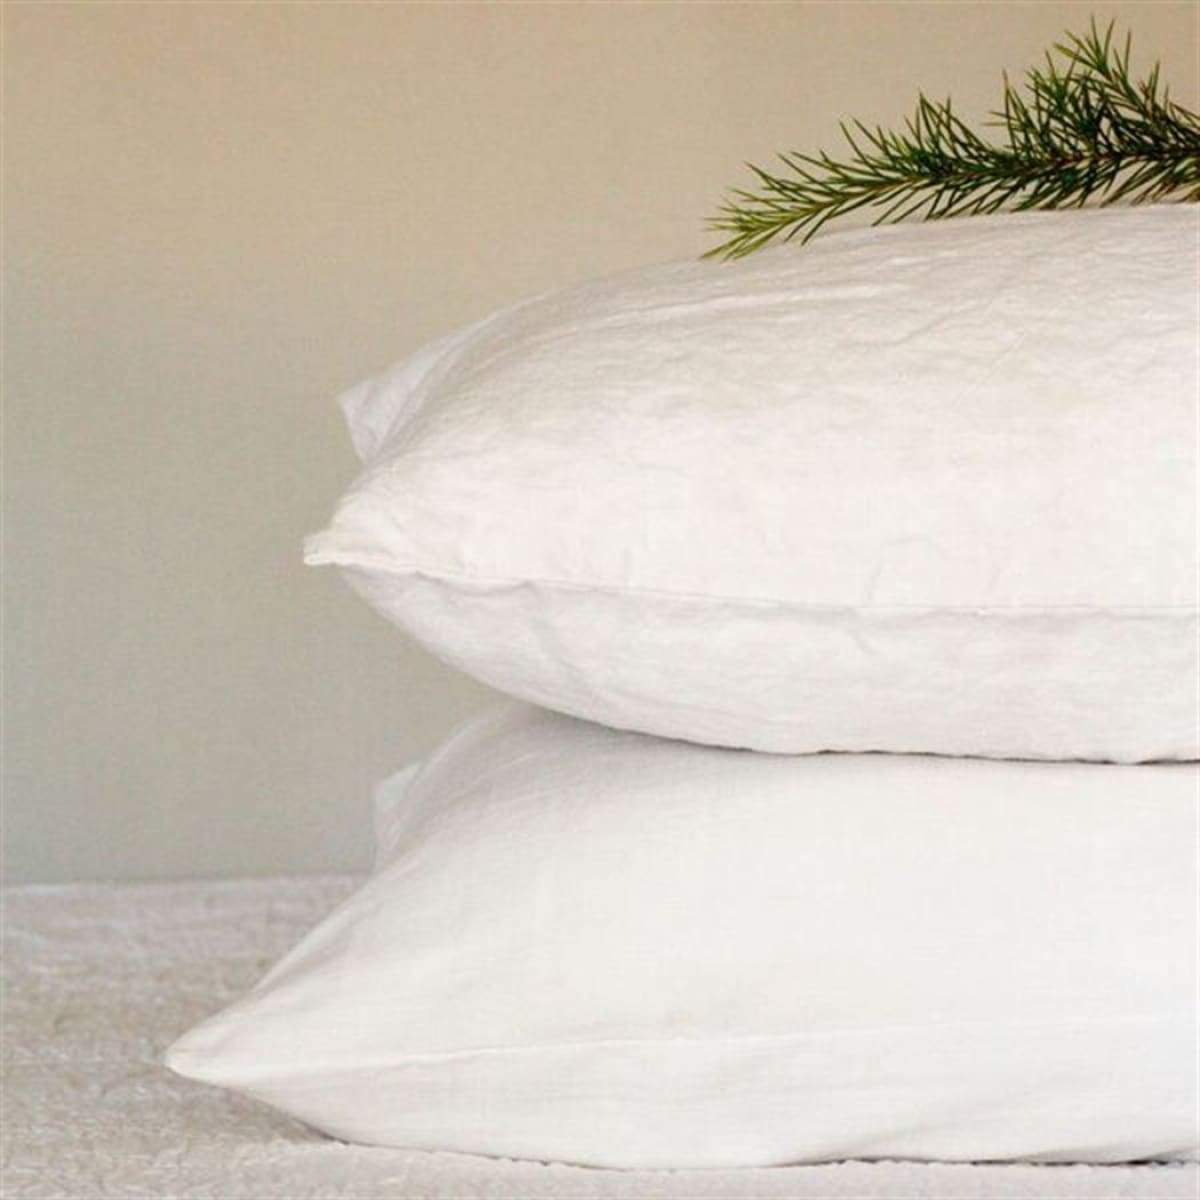 Goose Down Feather Throw Pillow Inserts Down Filling, With Cotton